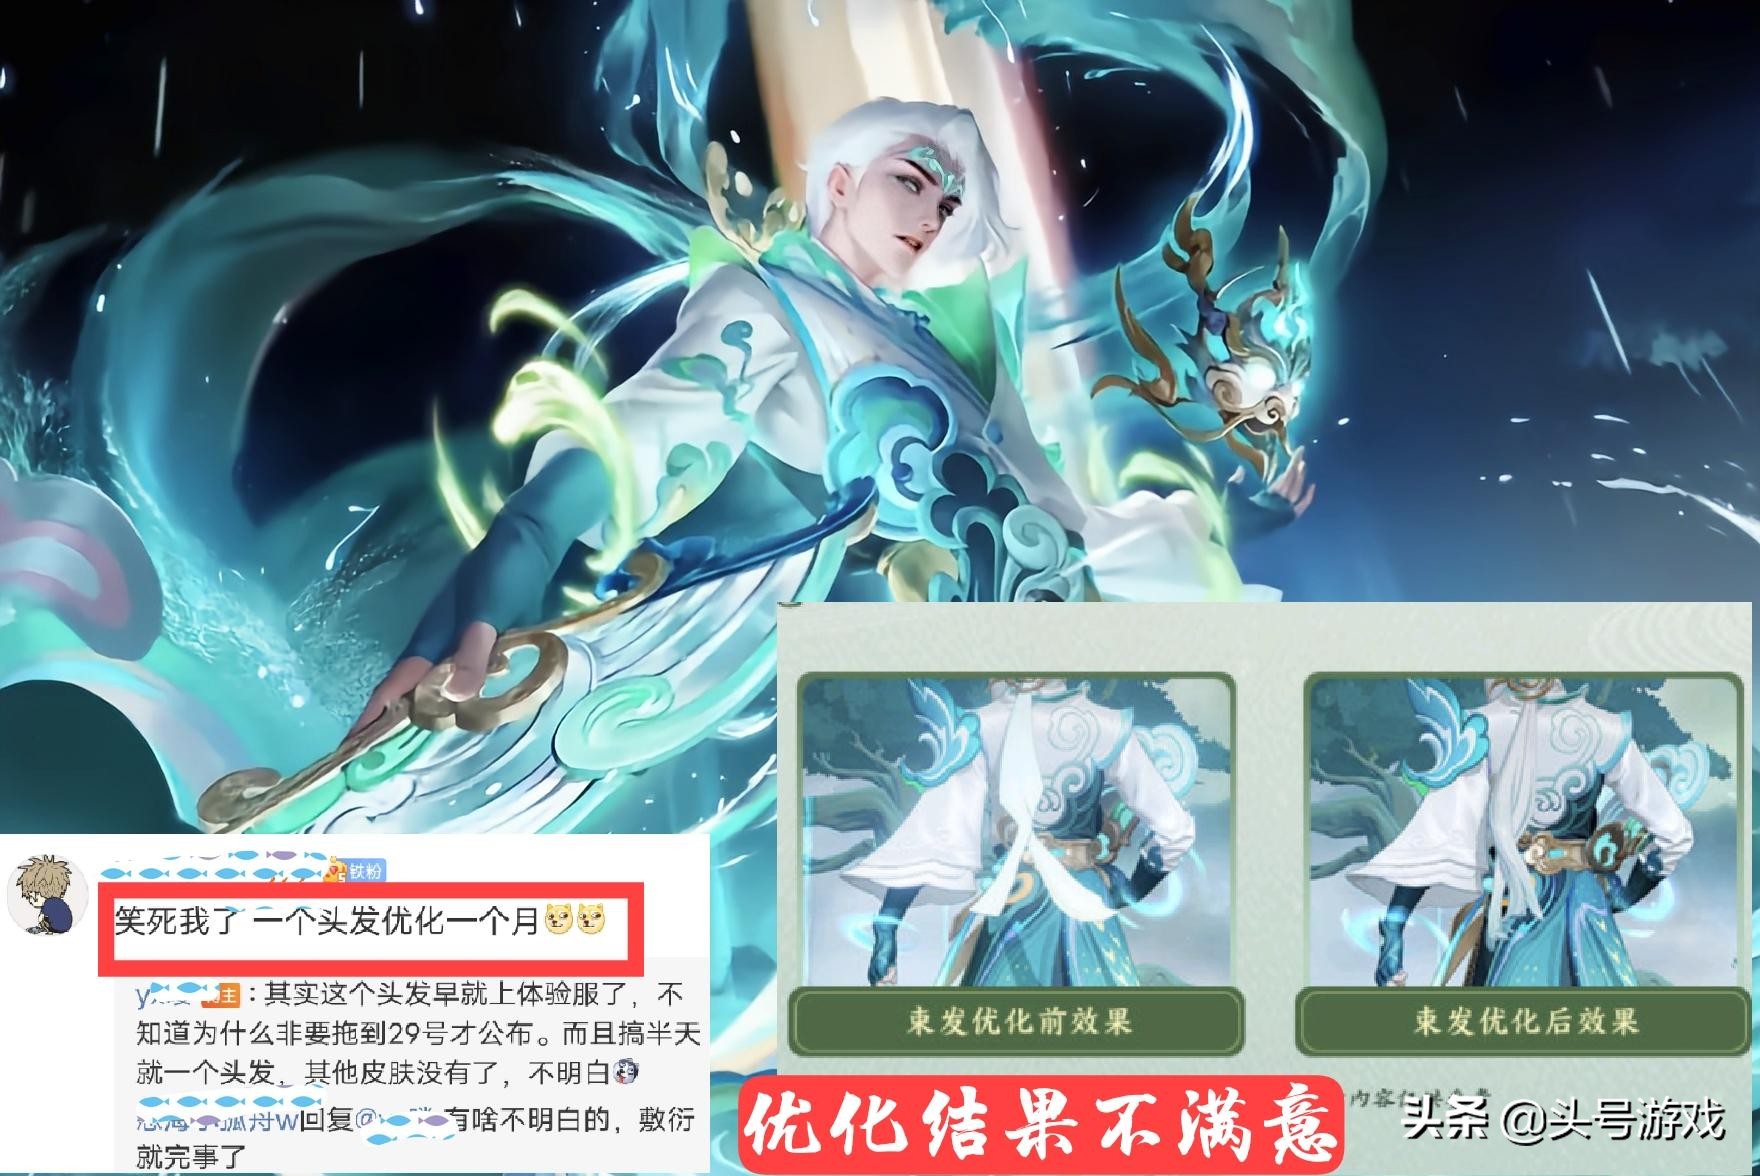 person honor: Tone of Li Yuanfang new skin upgrades, 4 fokelore are decided, equipment is good a crystal